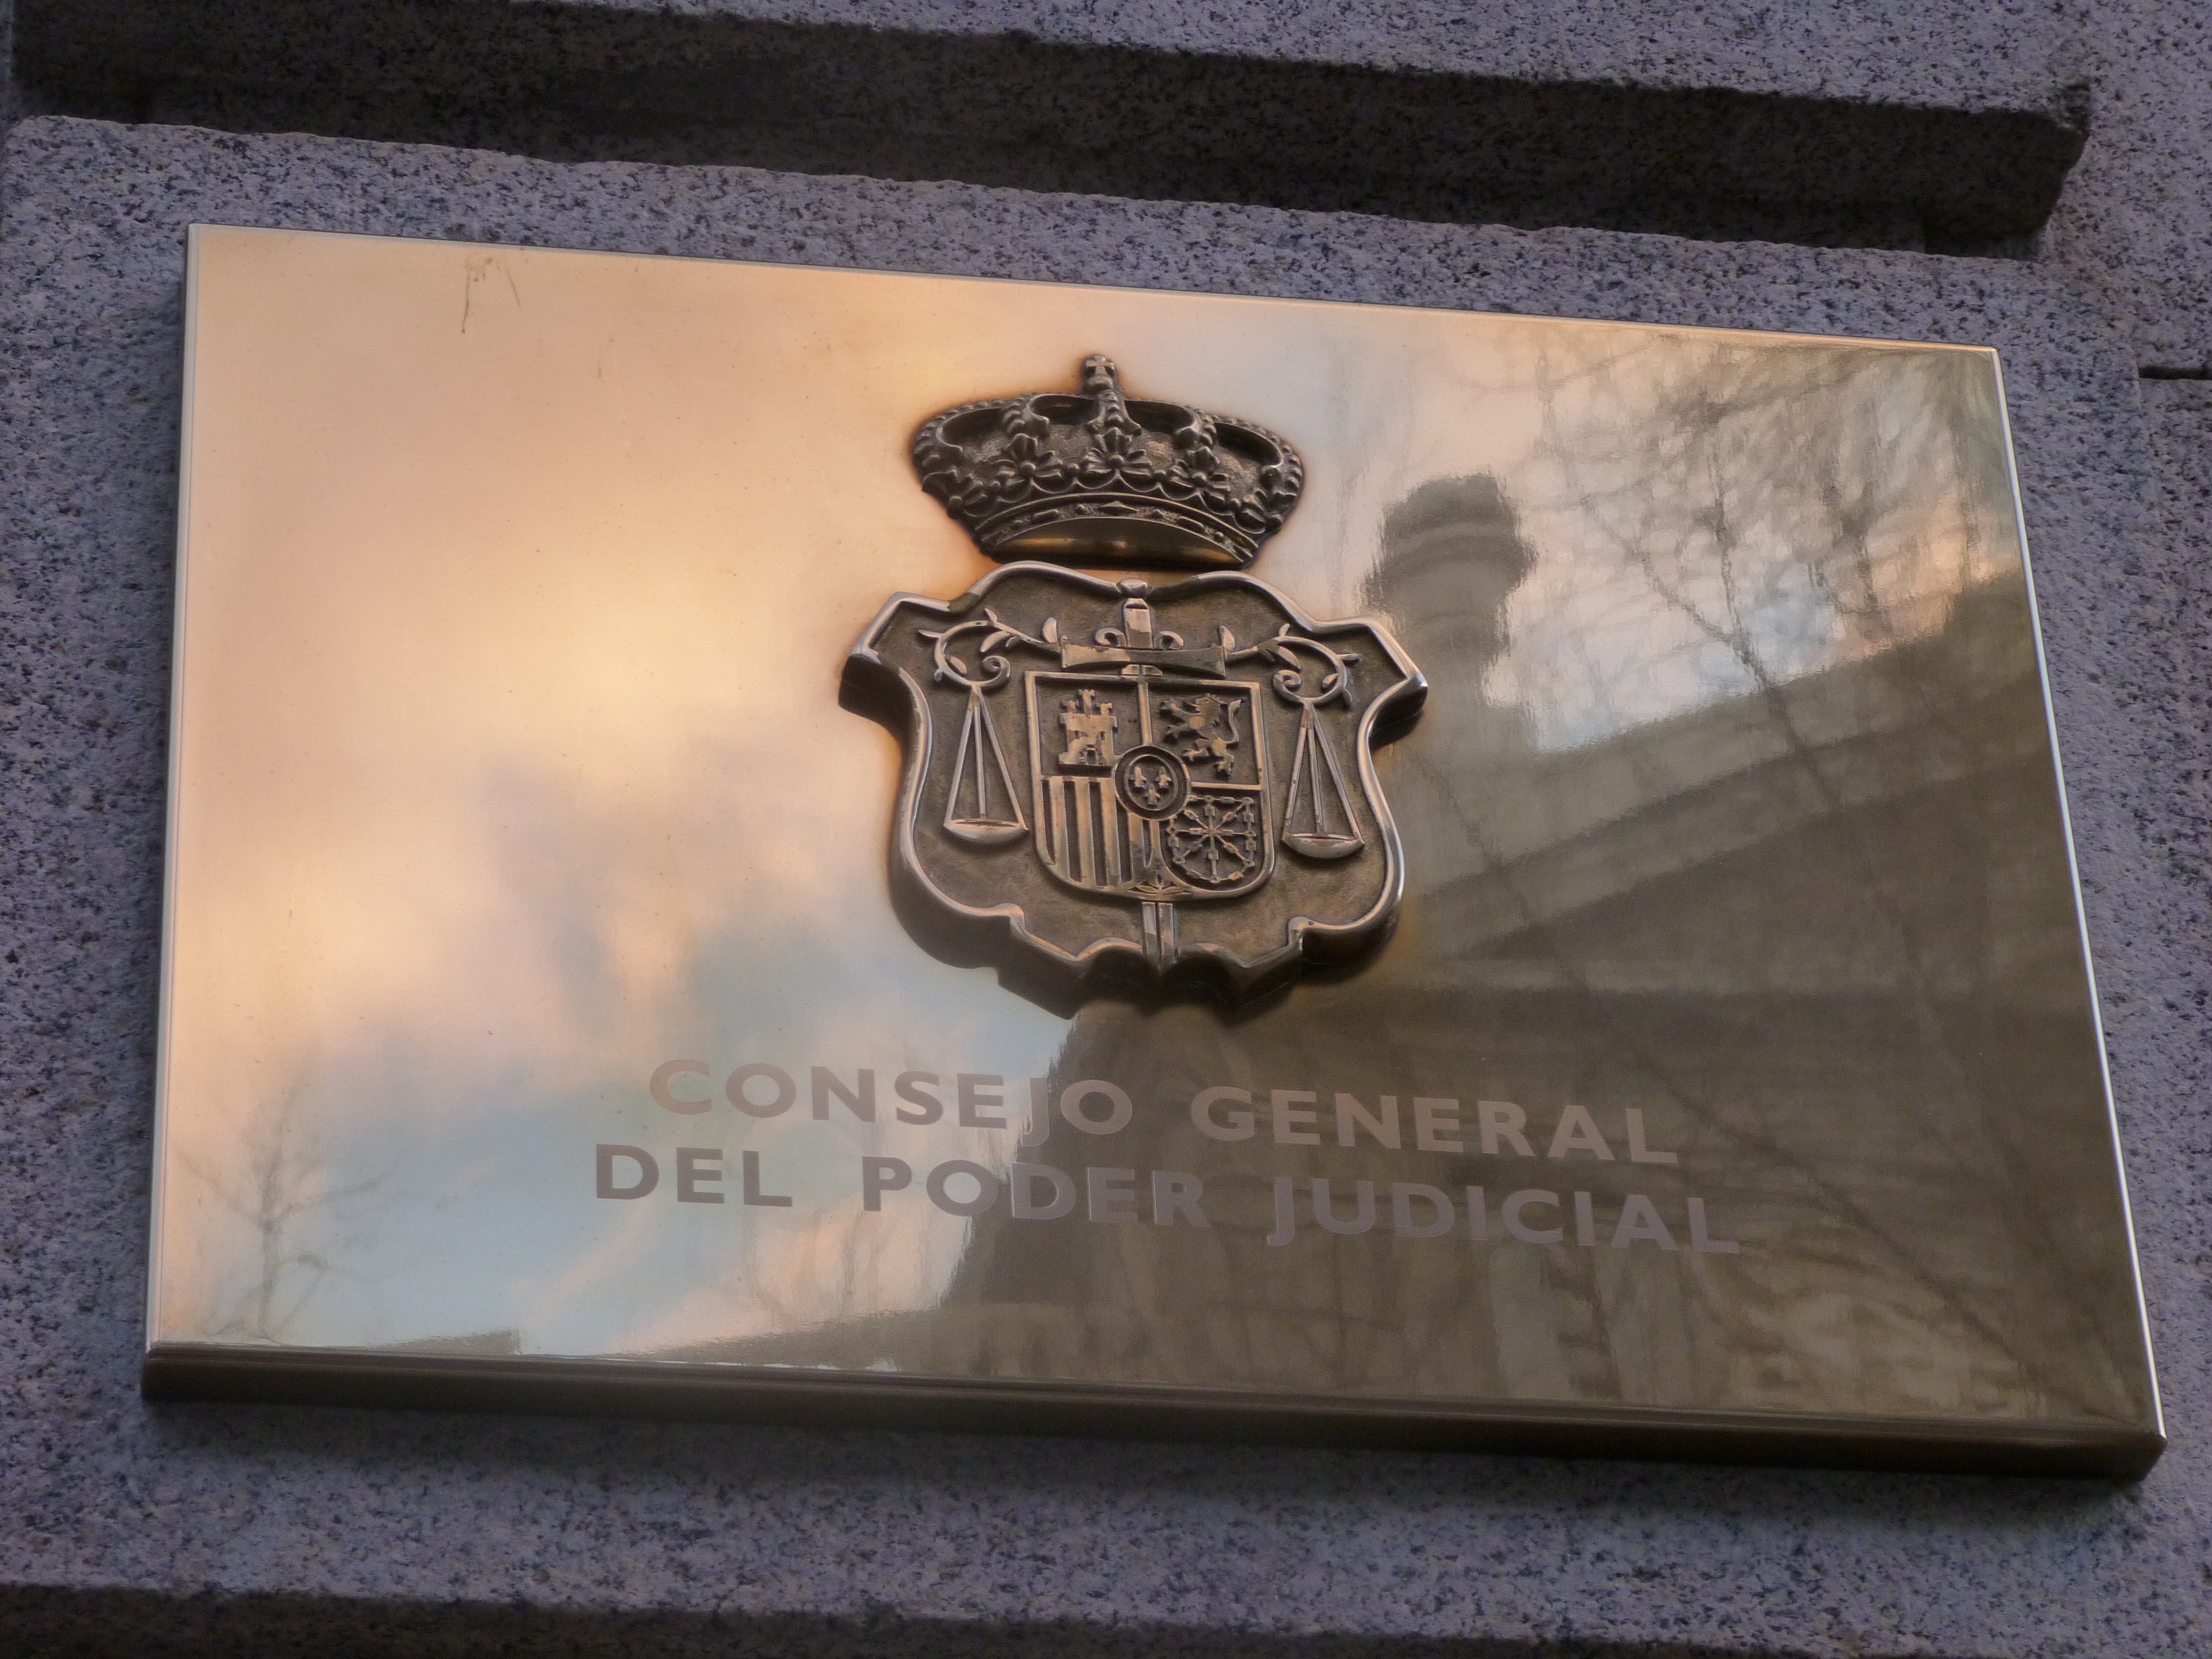 Emblem of the General Council of the Judiciary (CGPJ), Spain's highest judicial institution (by ACN)